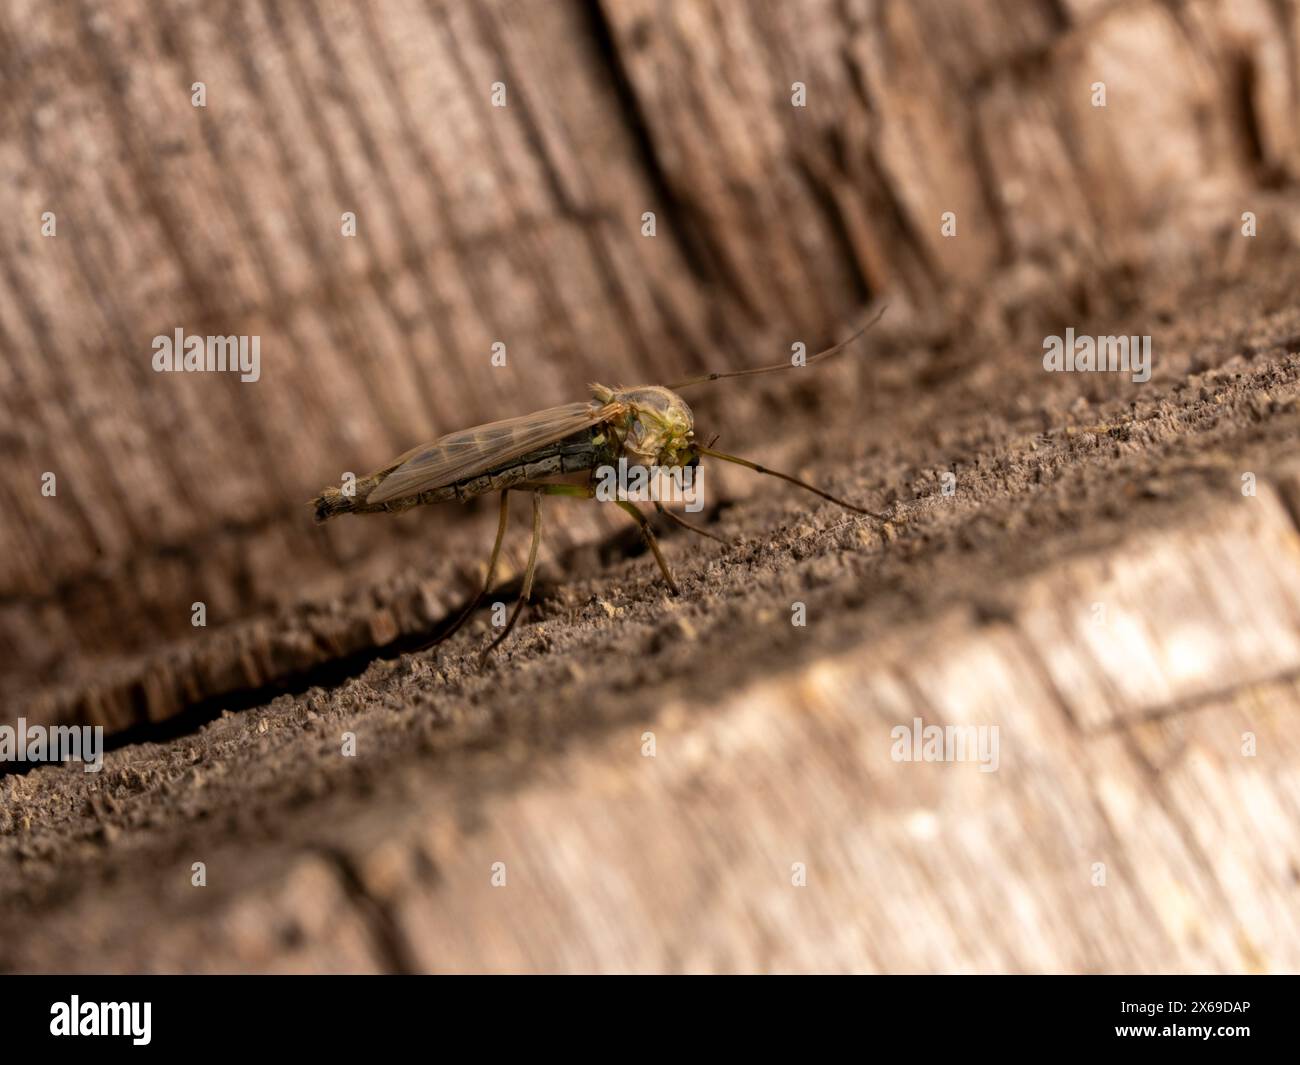 Genus Axarus Family Chironomidae wild nature insect photography, picture, wallpaper Stock Photo